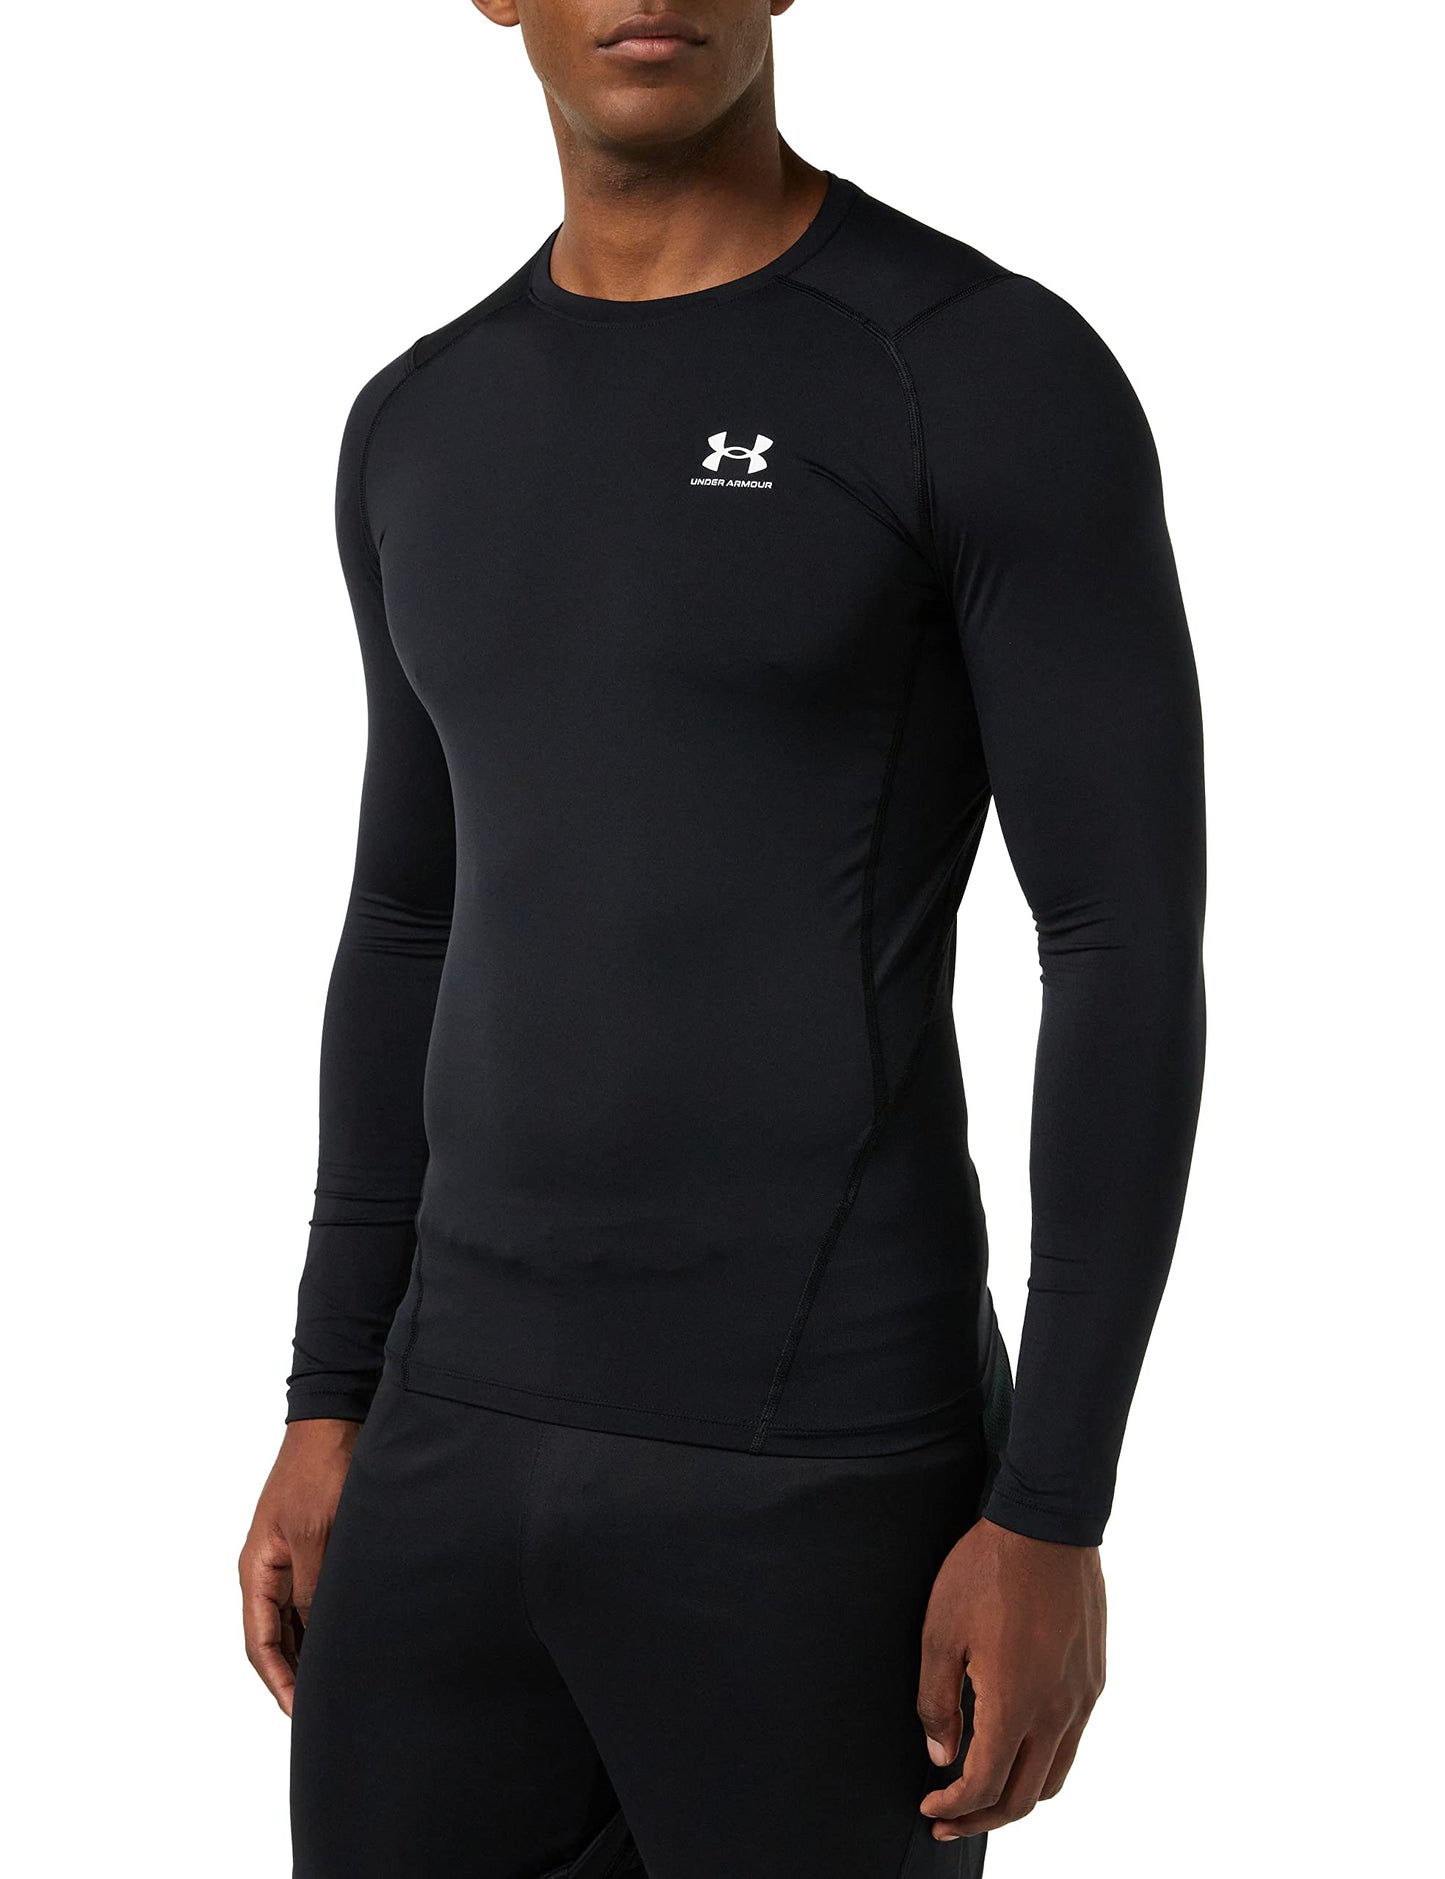 Under Armour Men's Ua Hg Armour Fitted Ls Long-Sleeved Sports t-Shirt for Men, Comfortable and Breathable Gym Clothes